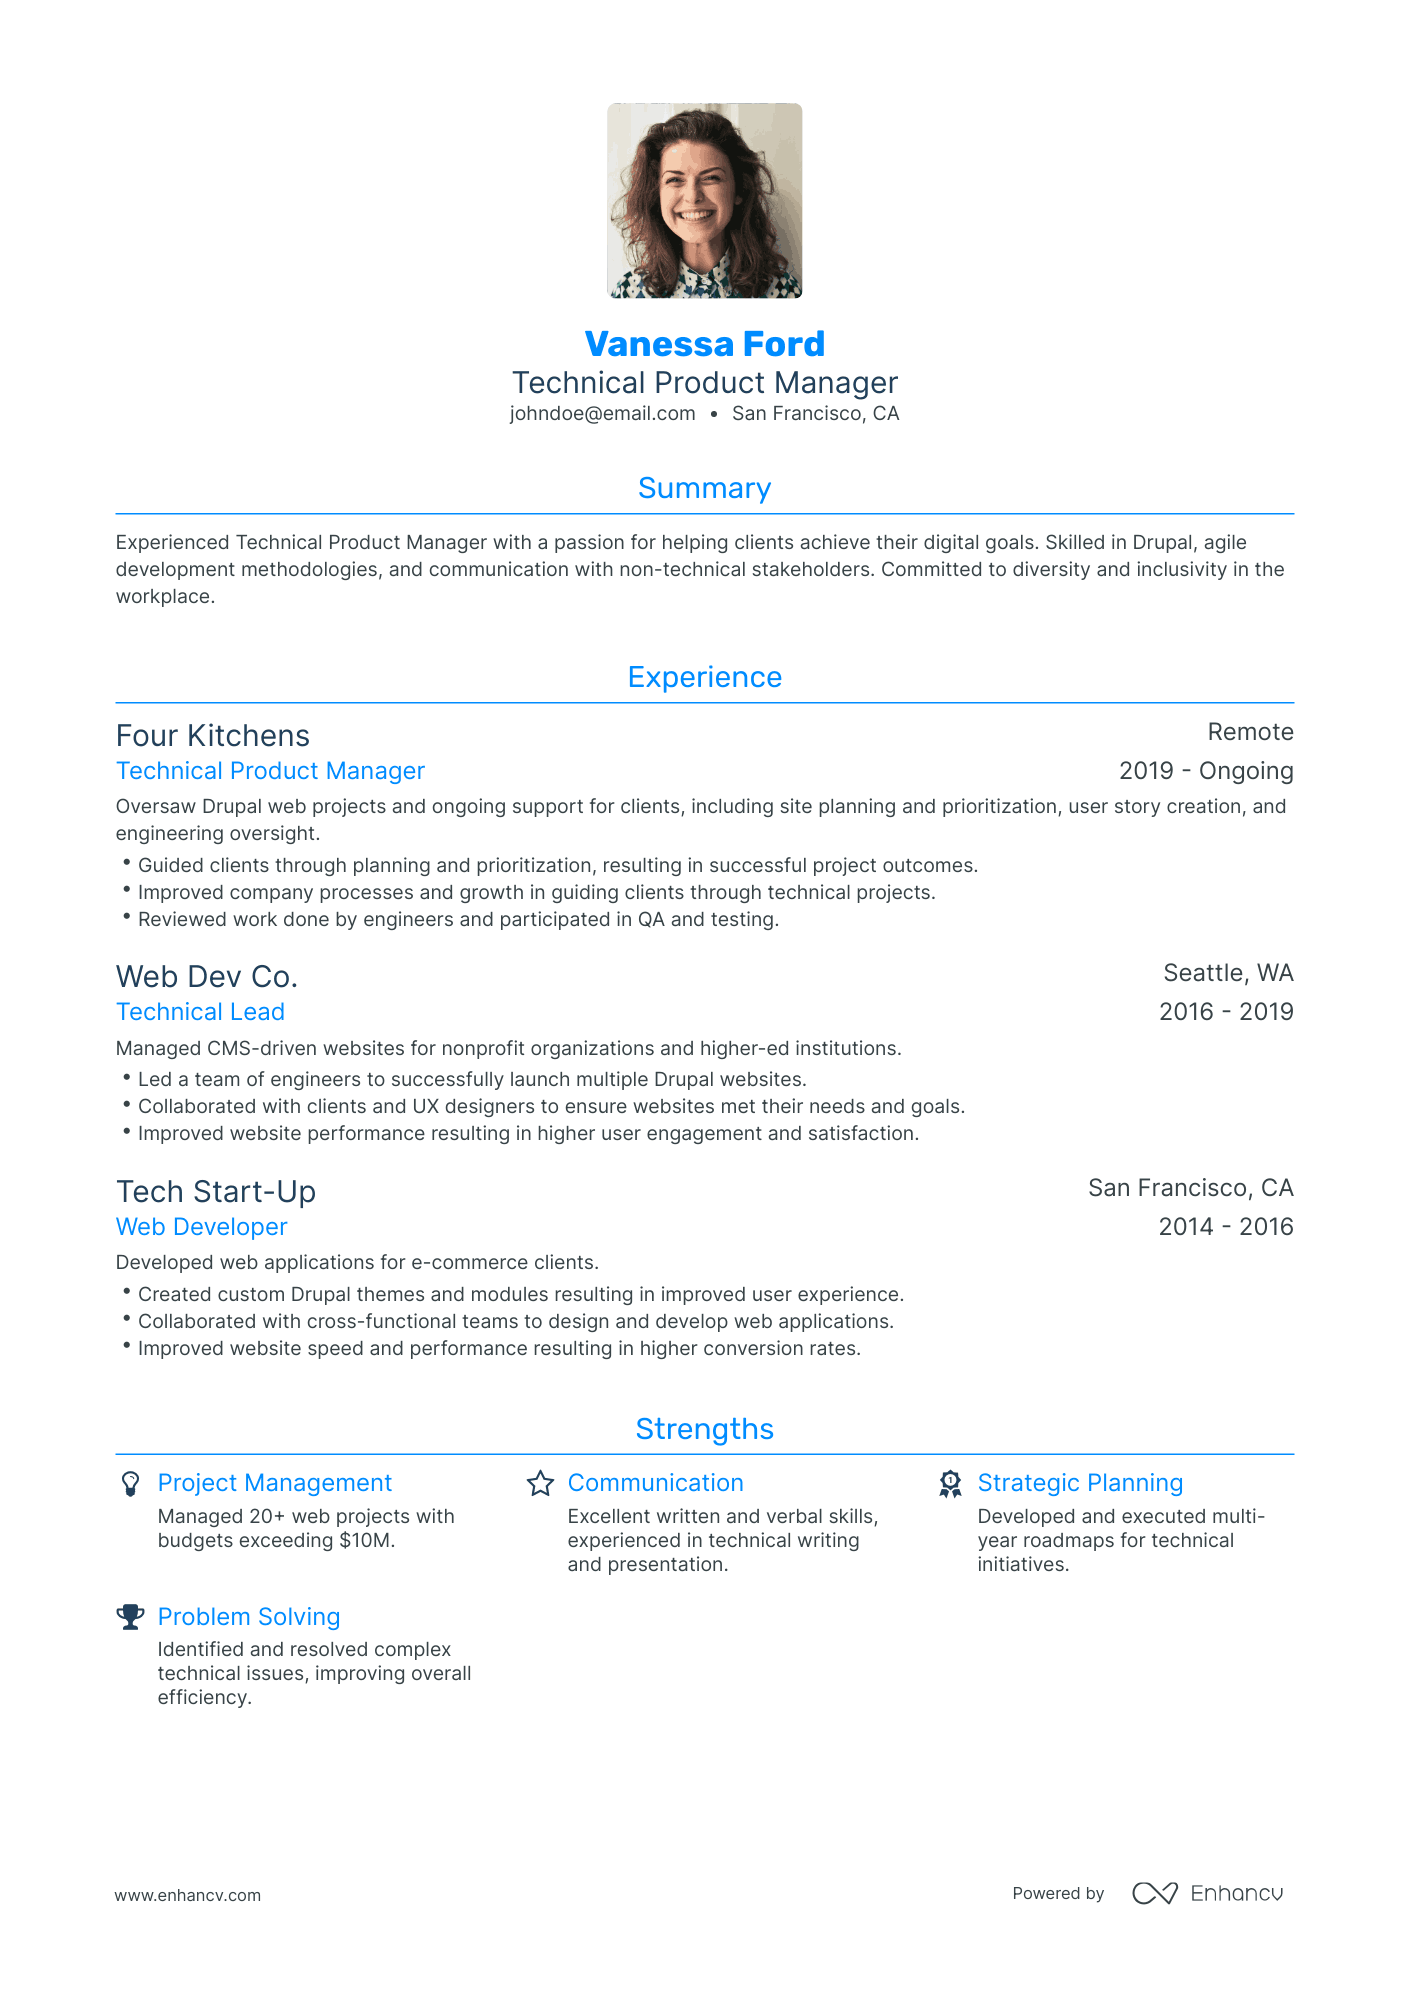 Traditional Technical Product Manager Resume Template